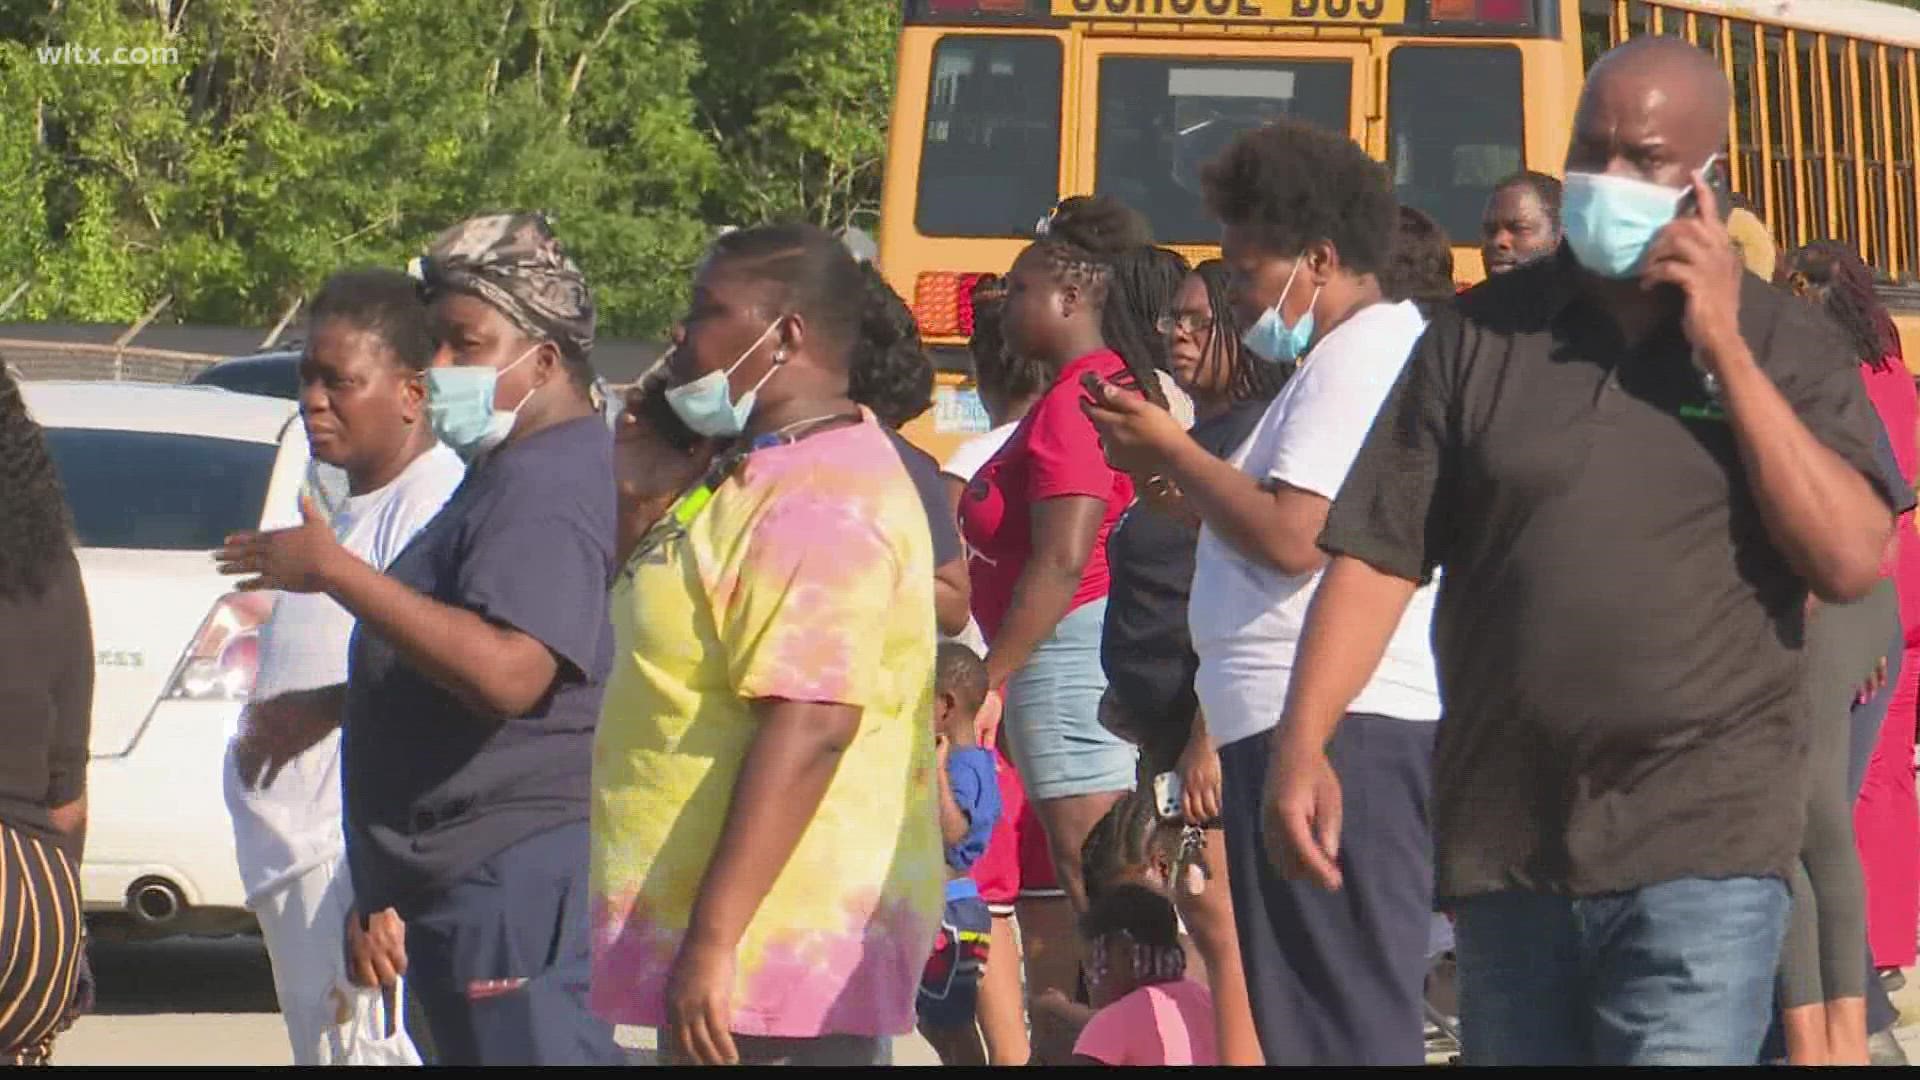 After several hours, families were finally reunited with their children following a shooting at Orangeburg-Wilkinson High School on Wednesday.